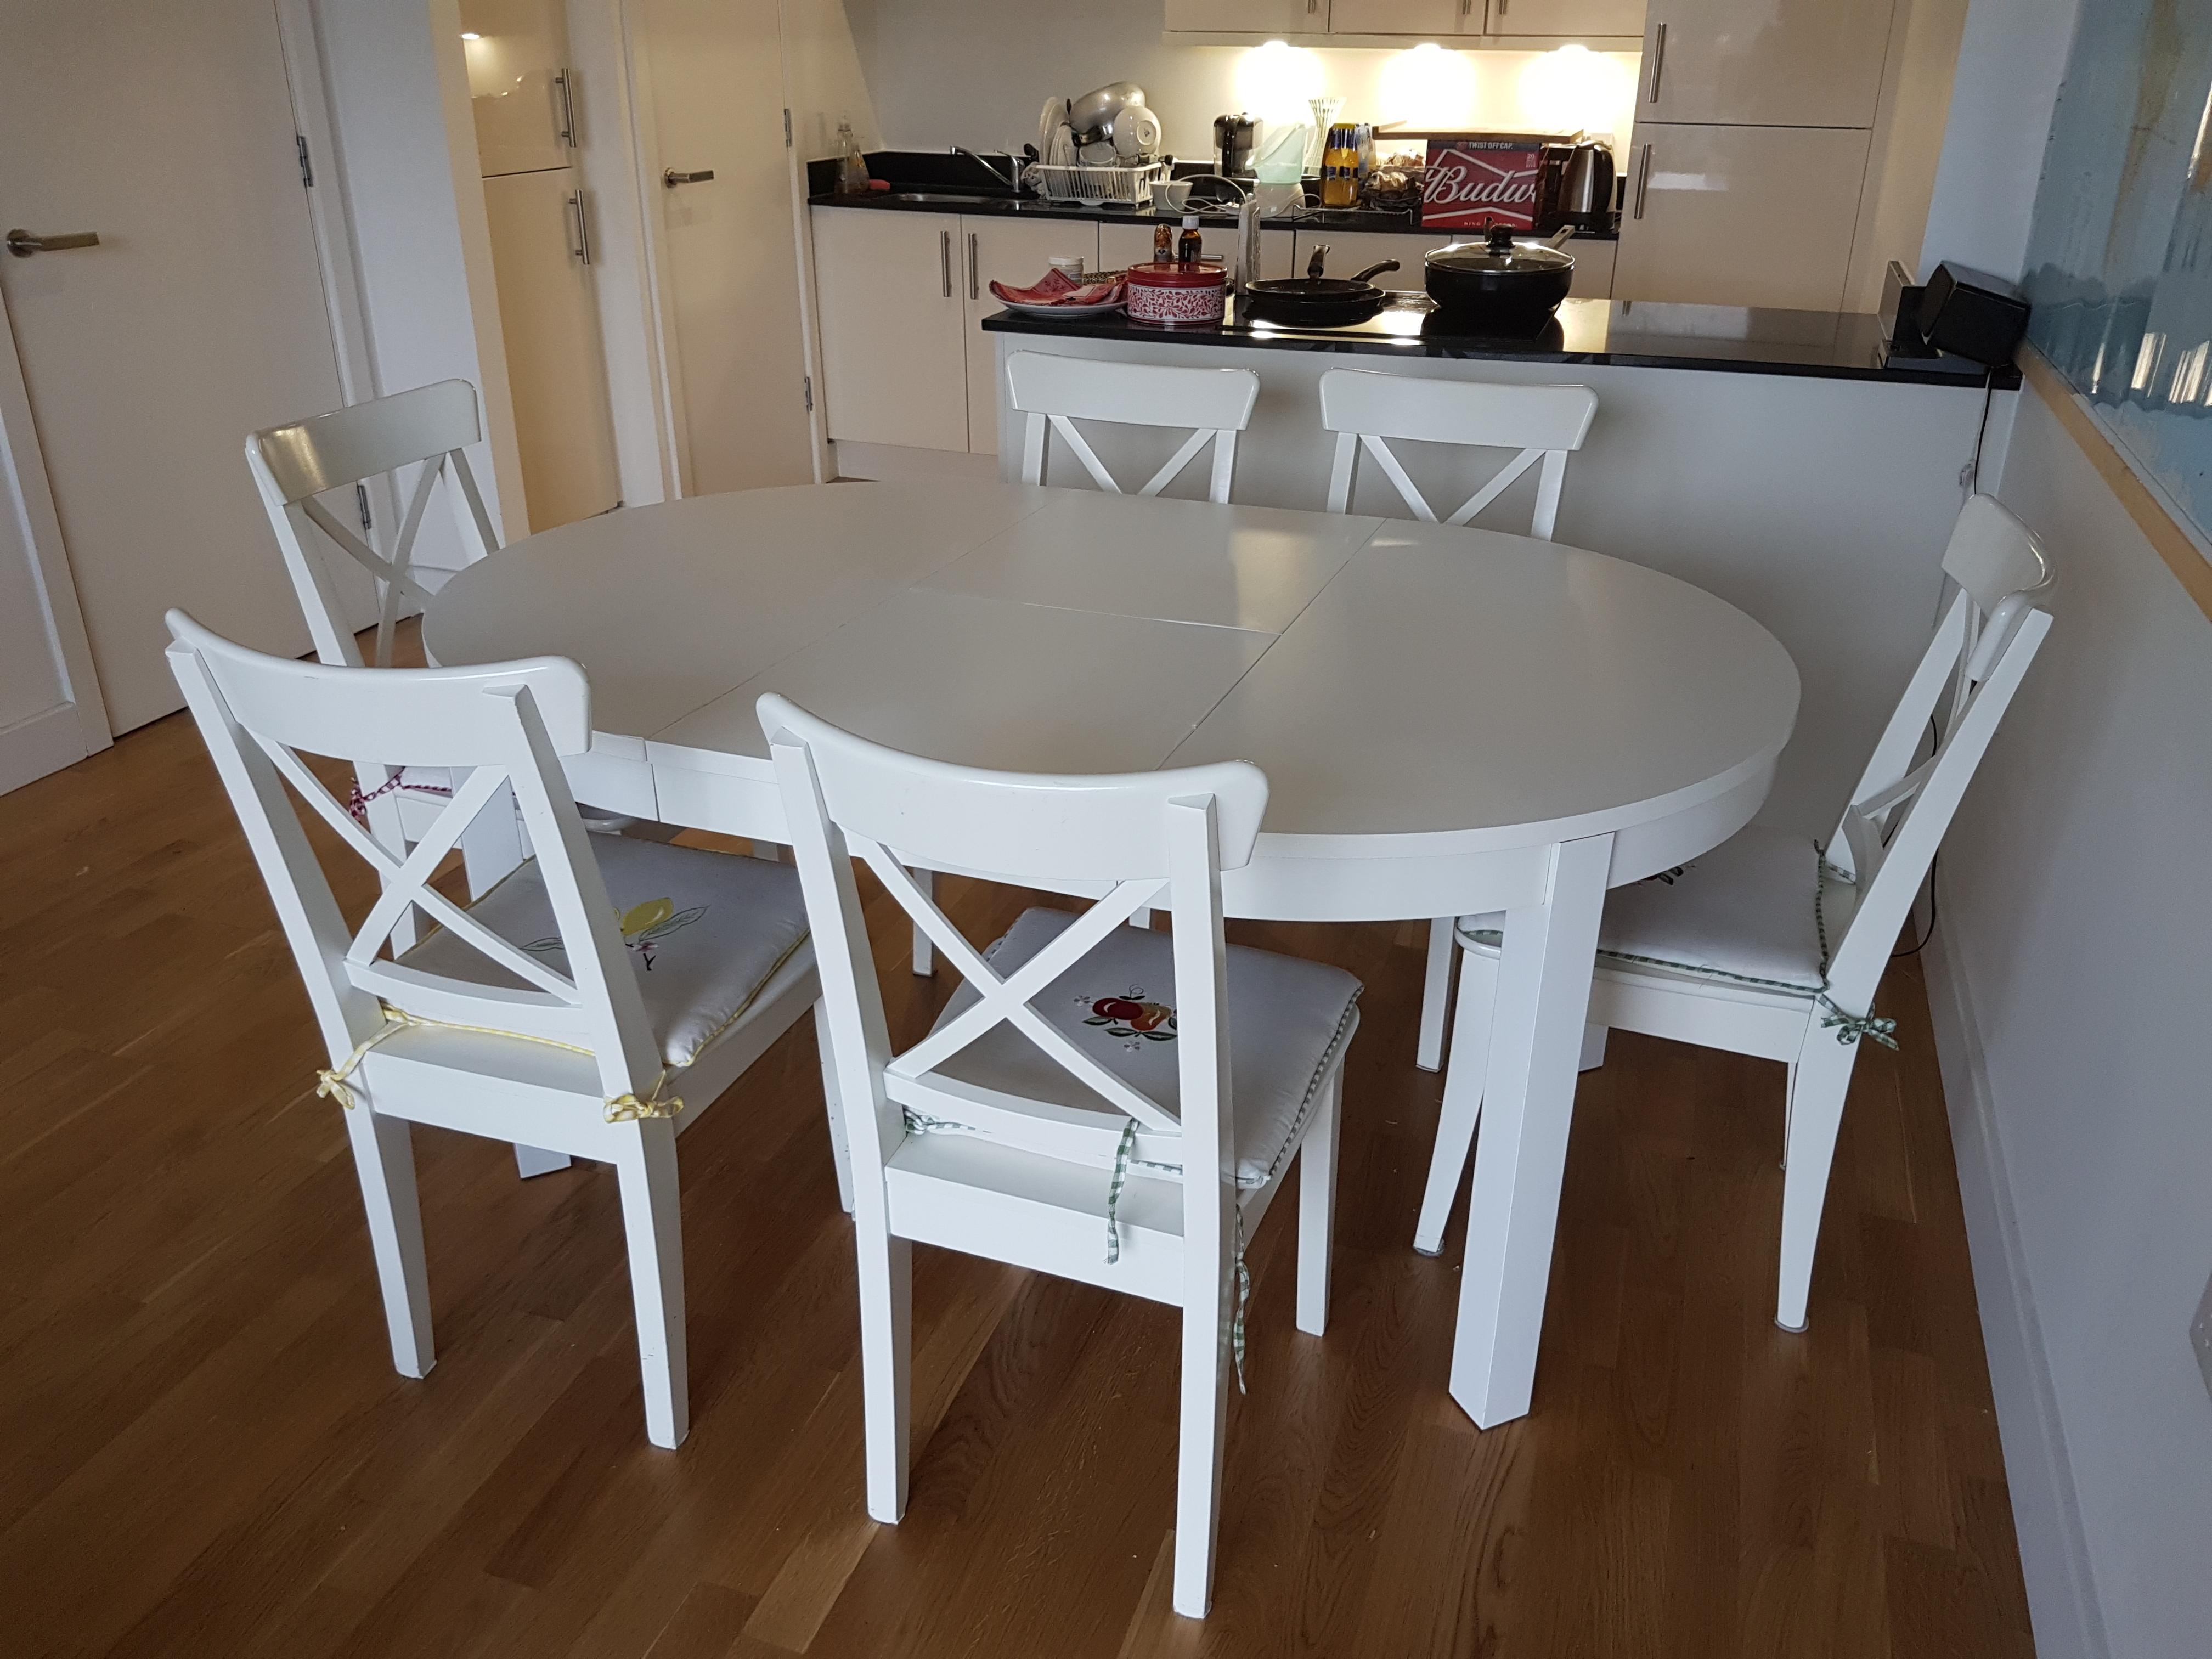 Extendable Dining Table Round Ikea, Round Extension Table Ikea